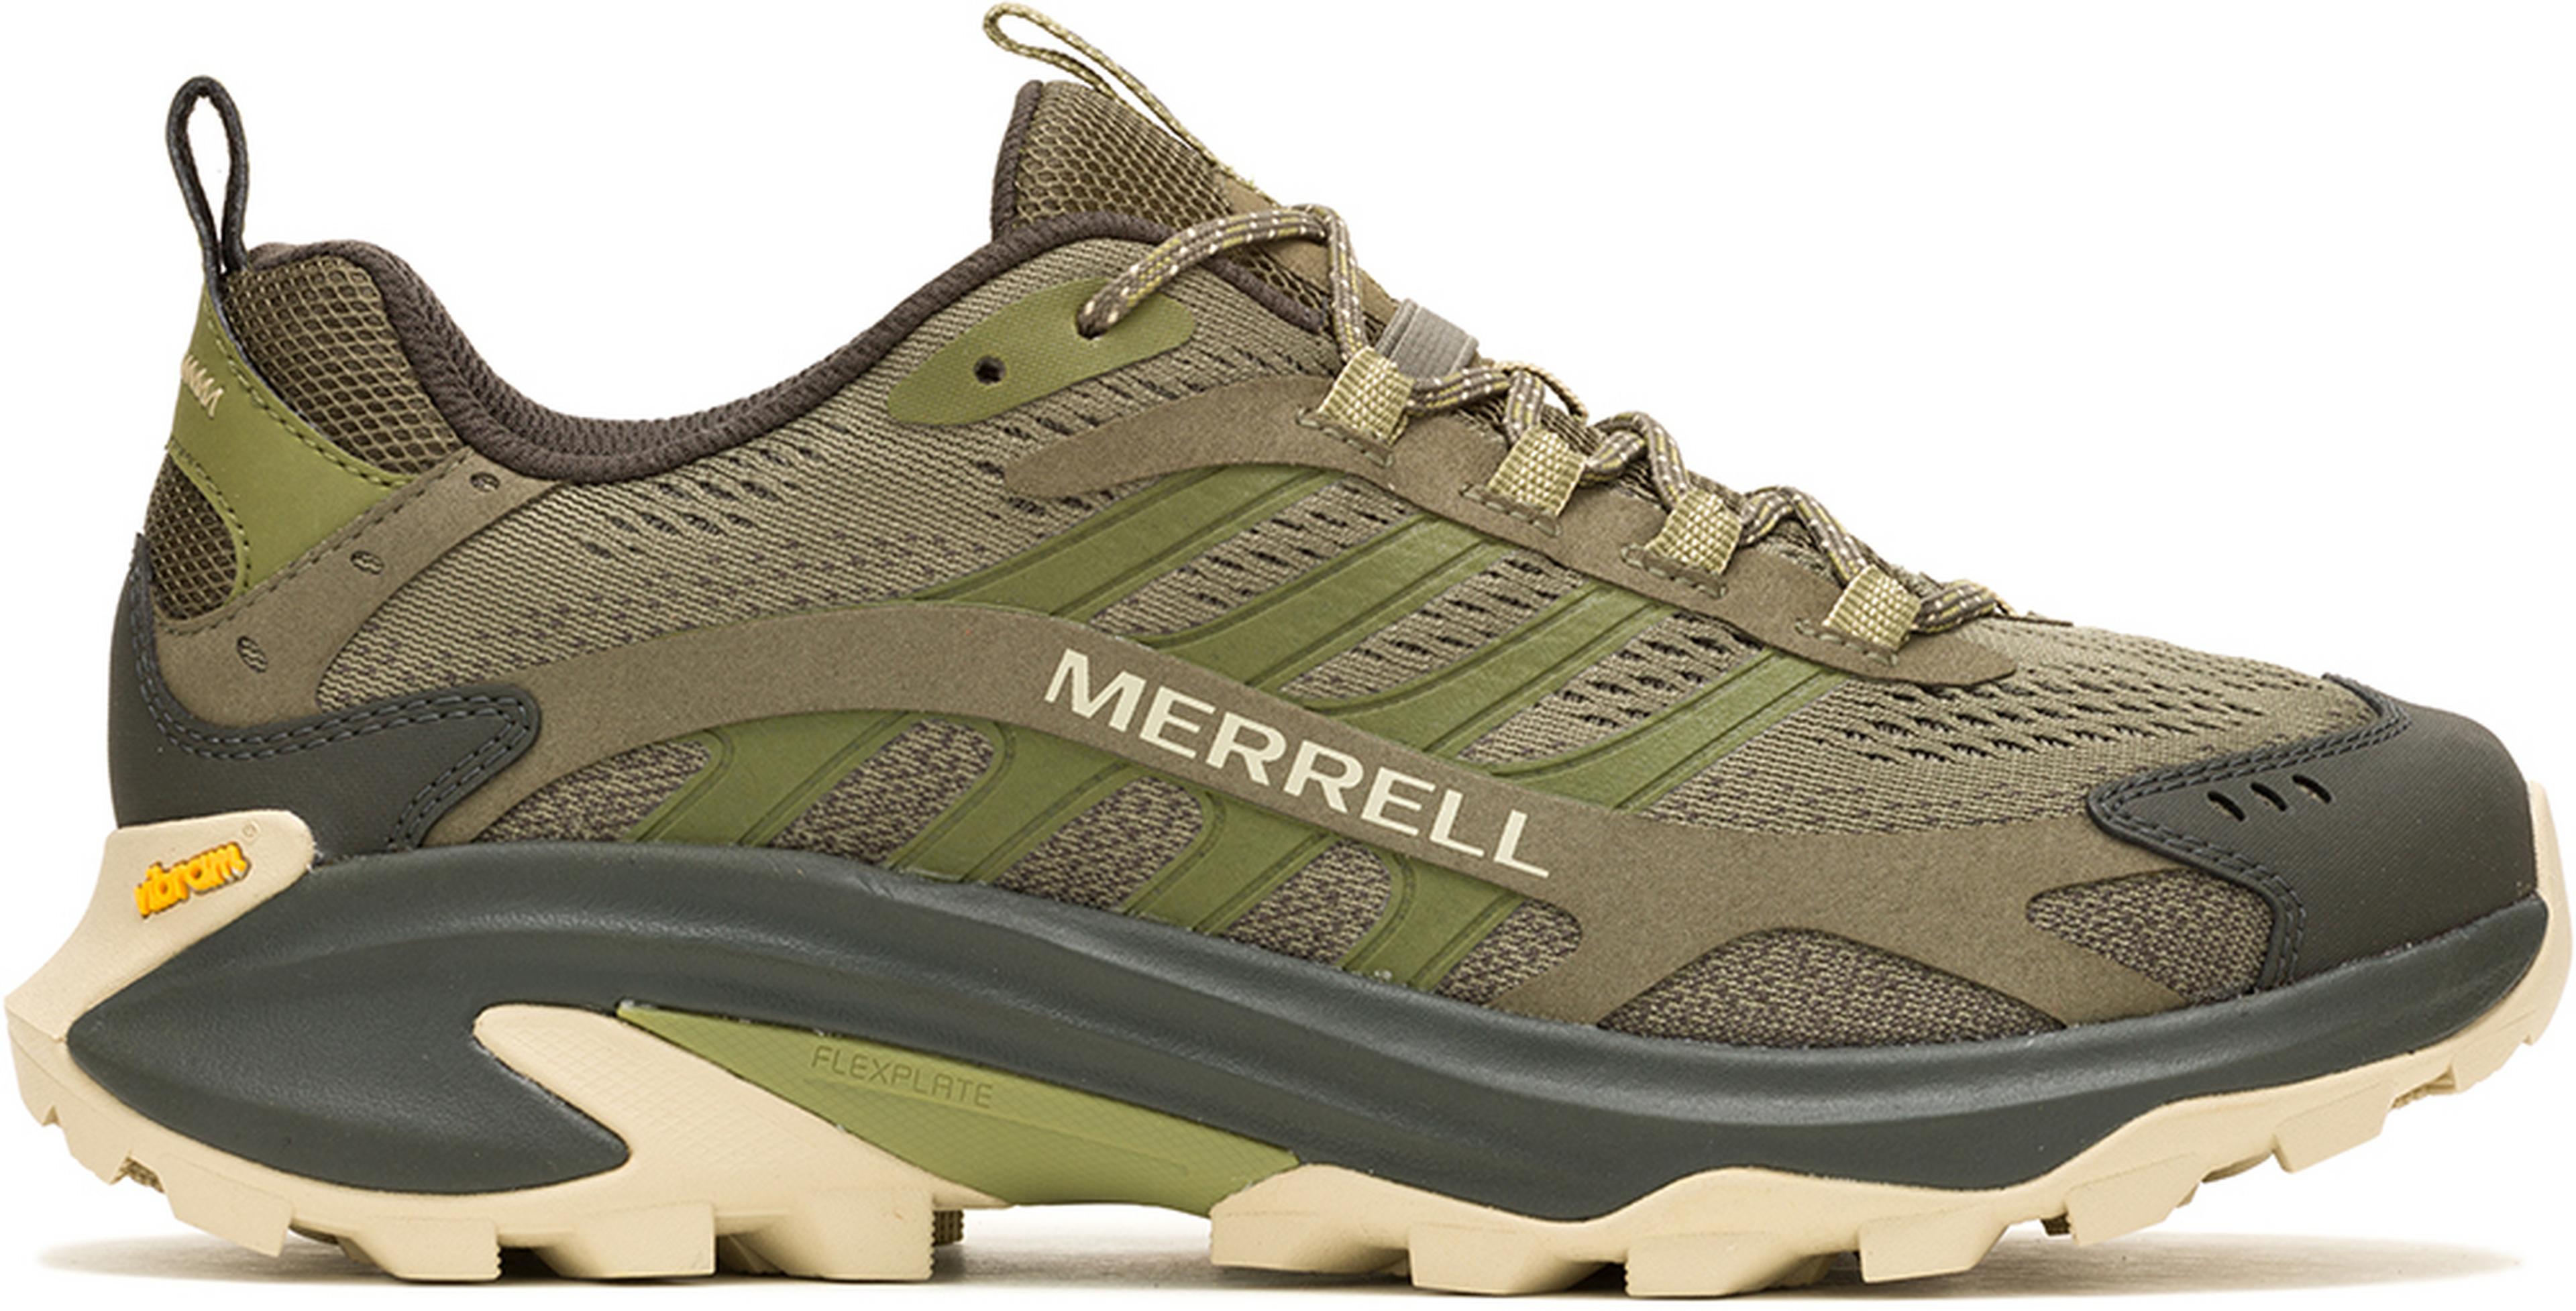 Merrell Moab Speed 2 Hiking Shoes